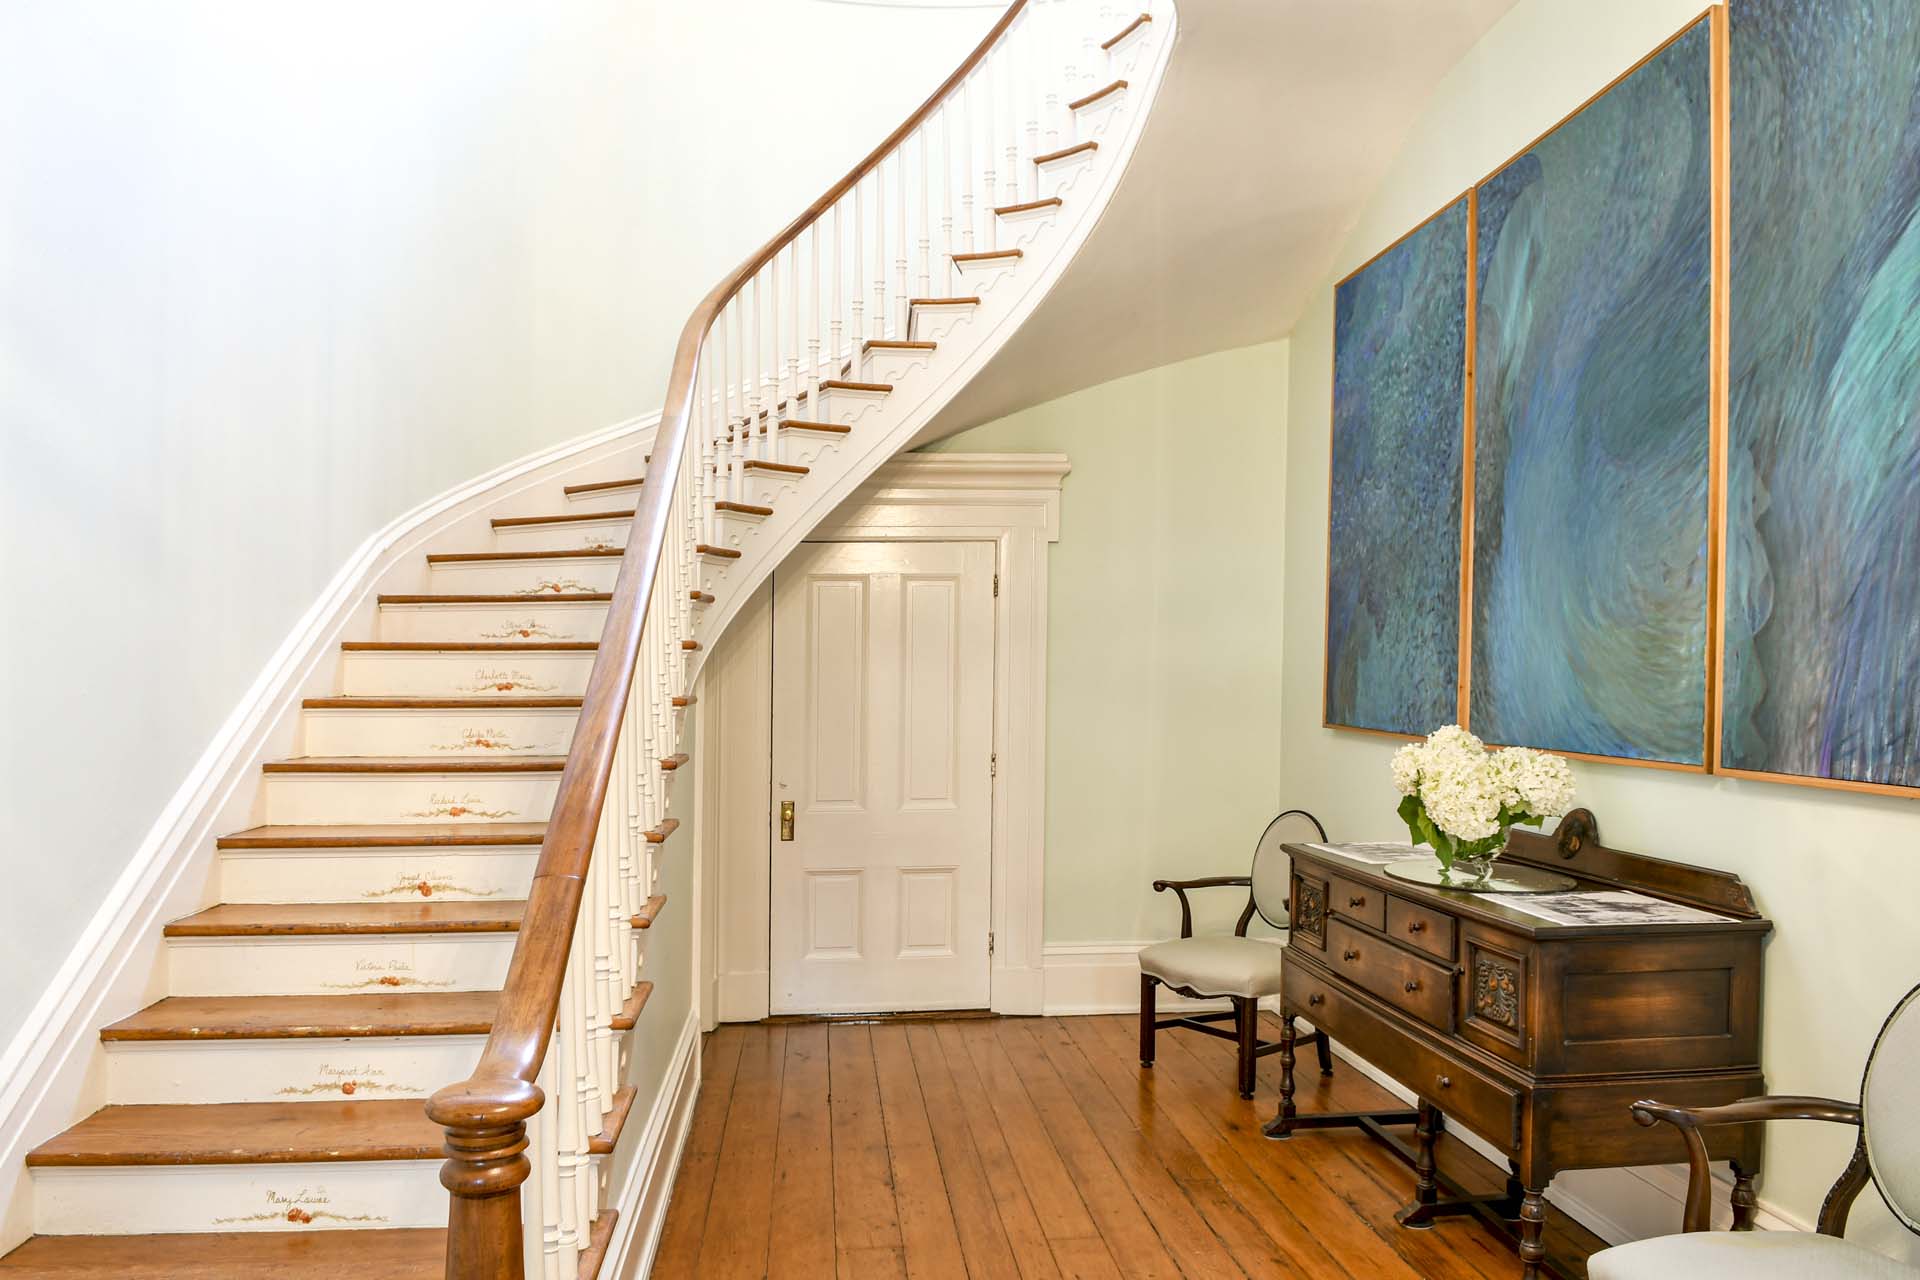 Staging Old Homes with Good Bones